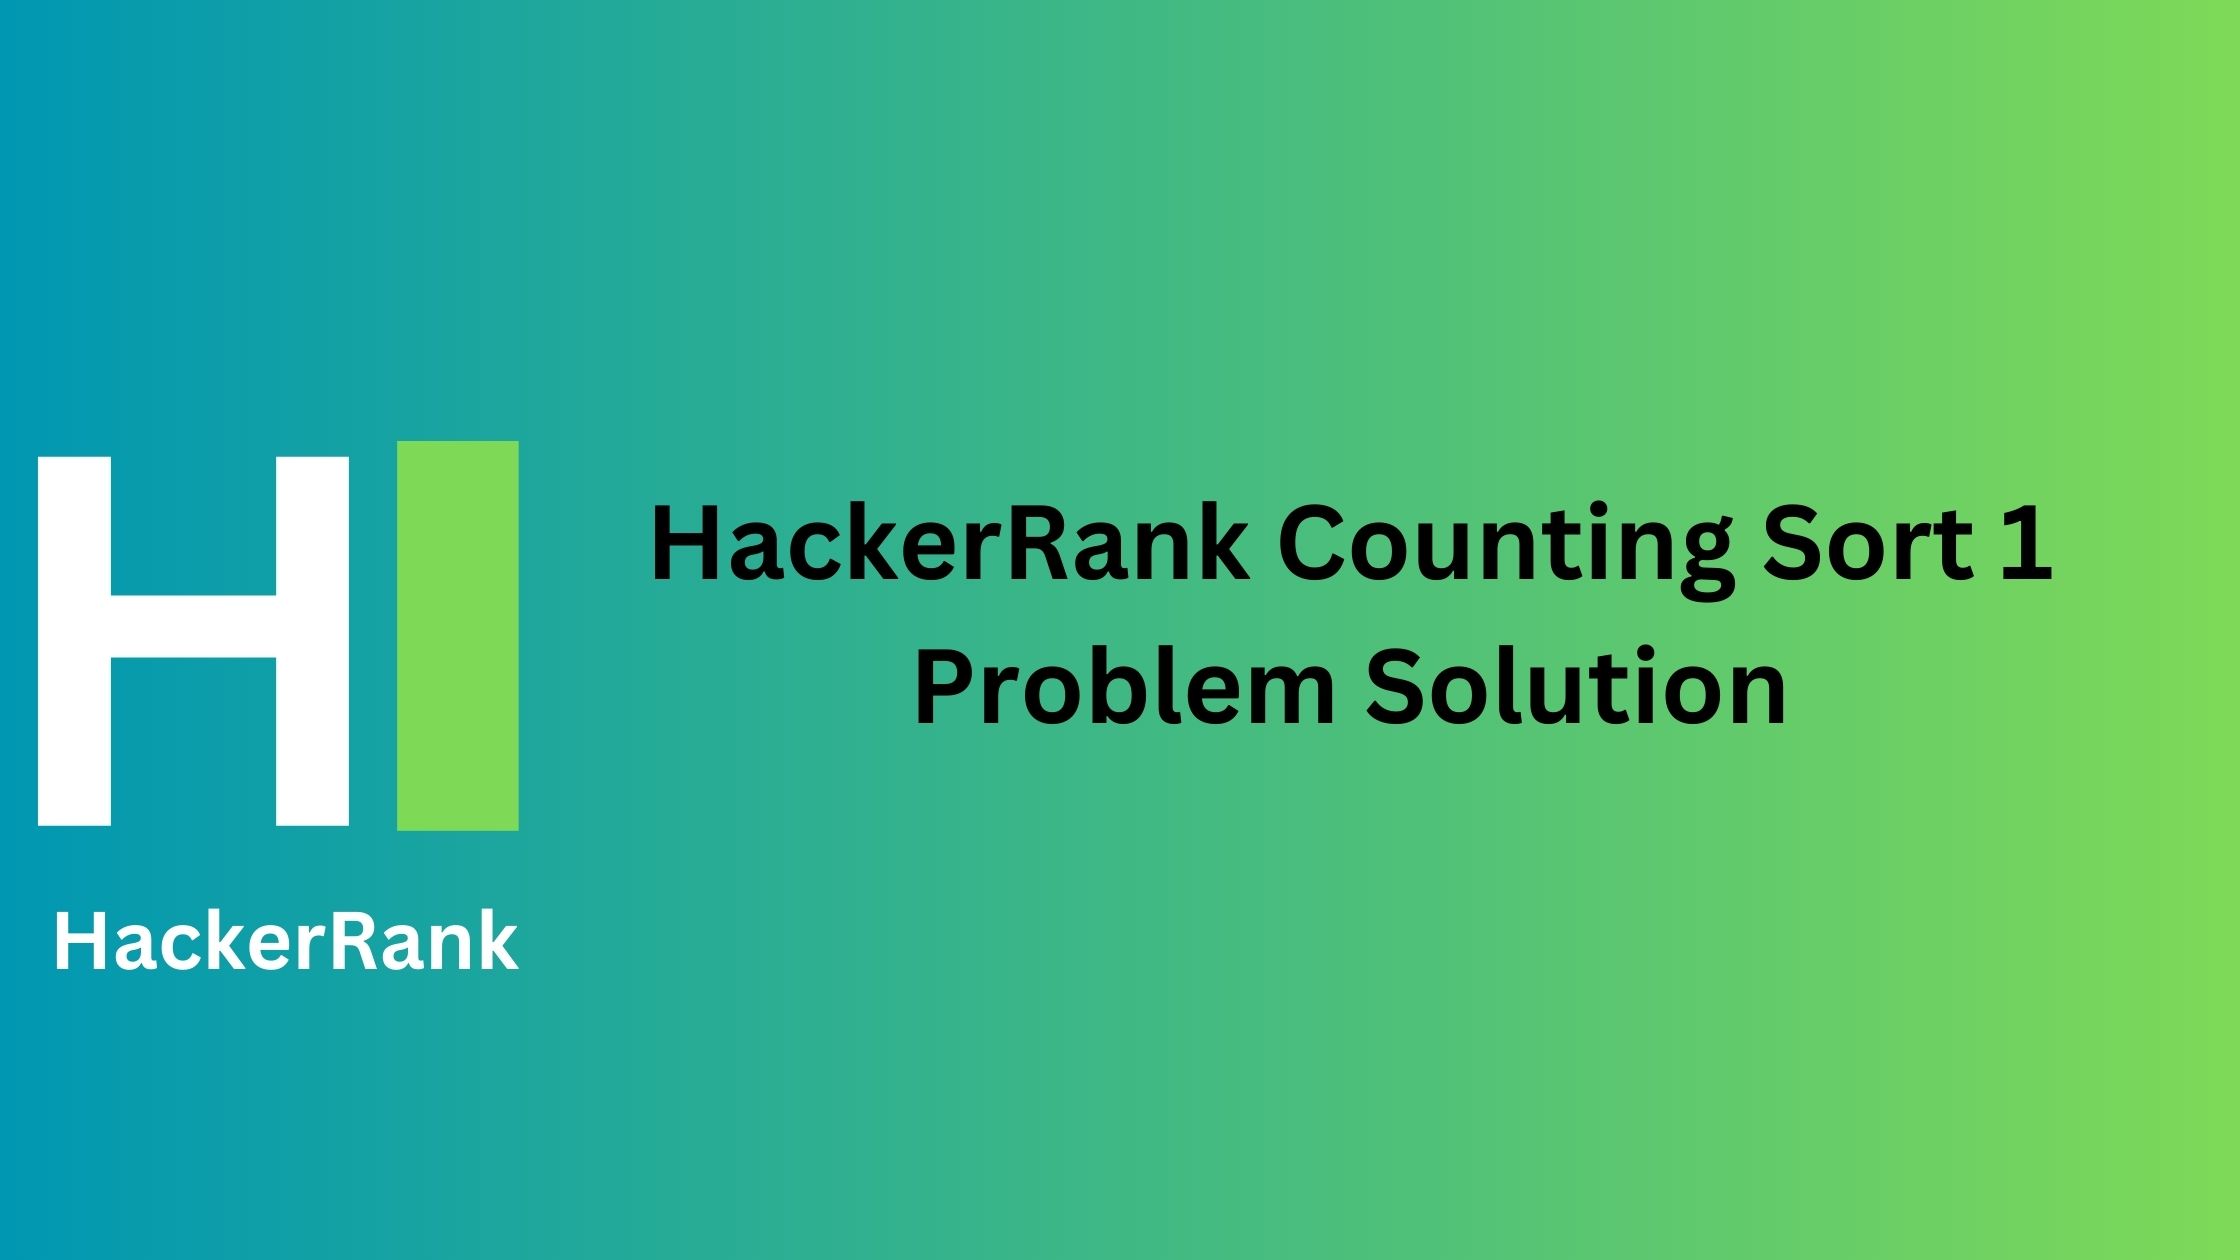 HackerRank Counting Sort 1 Problem Solution